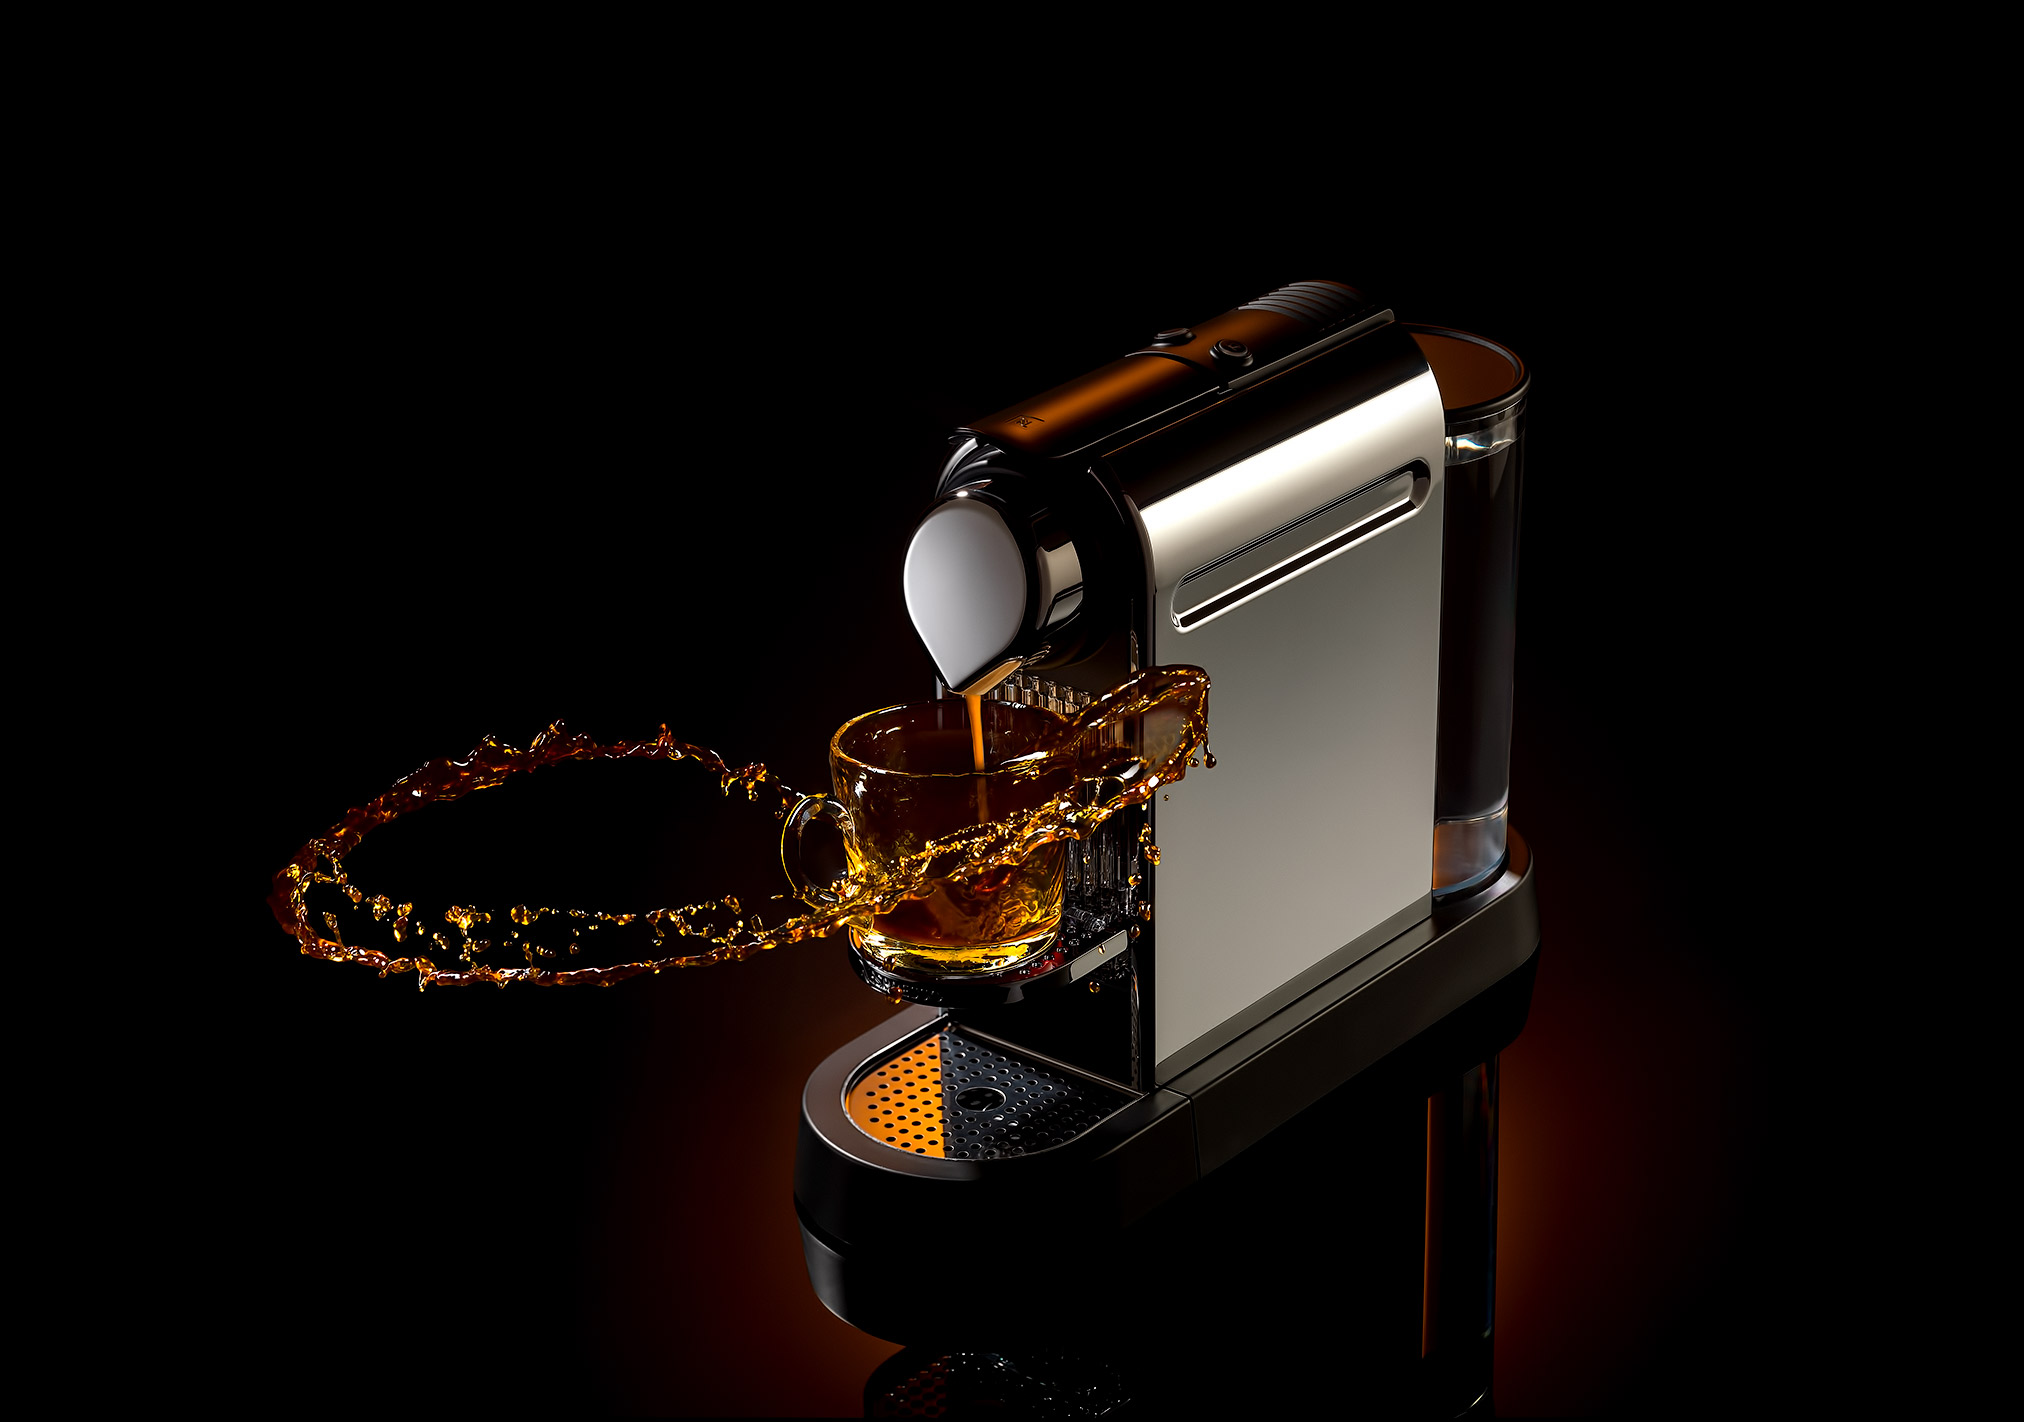 Coffee Maker Product Photography Course - Downloadable Version